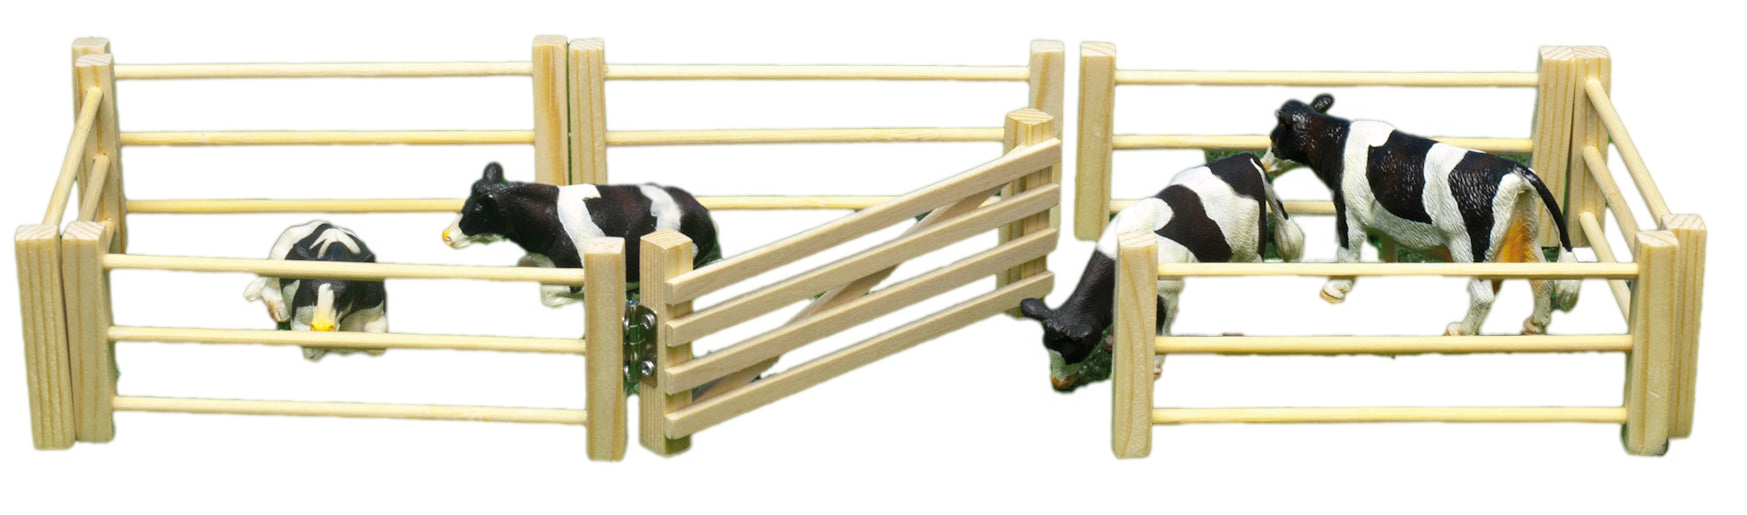 Wooden fence 6 pcs including gate 1:32